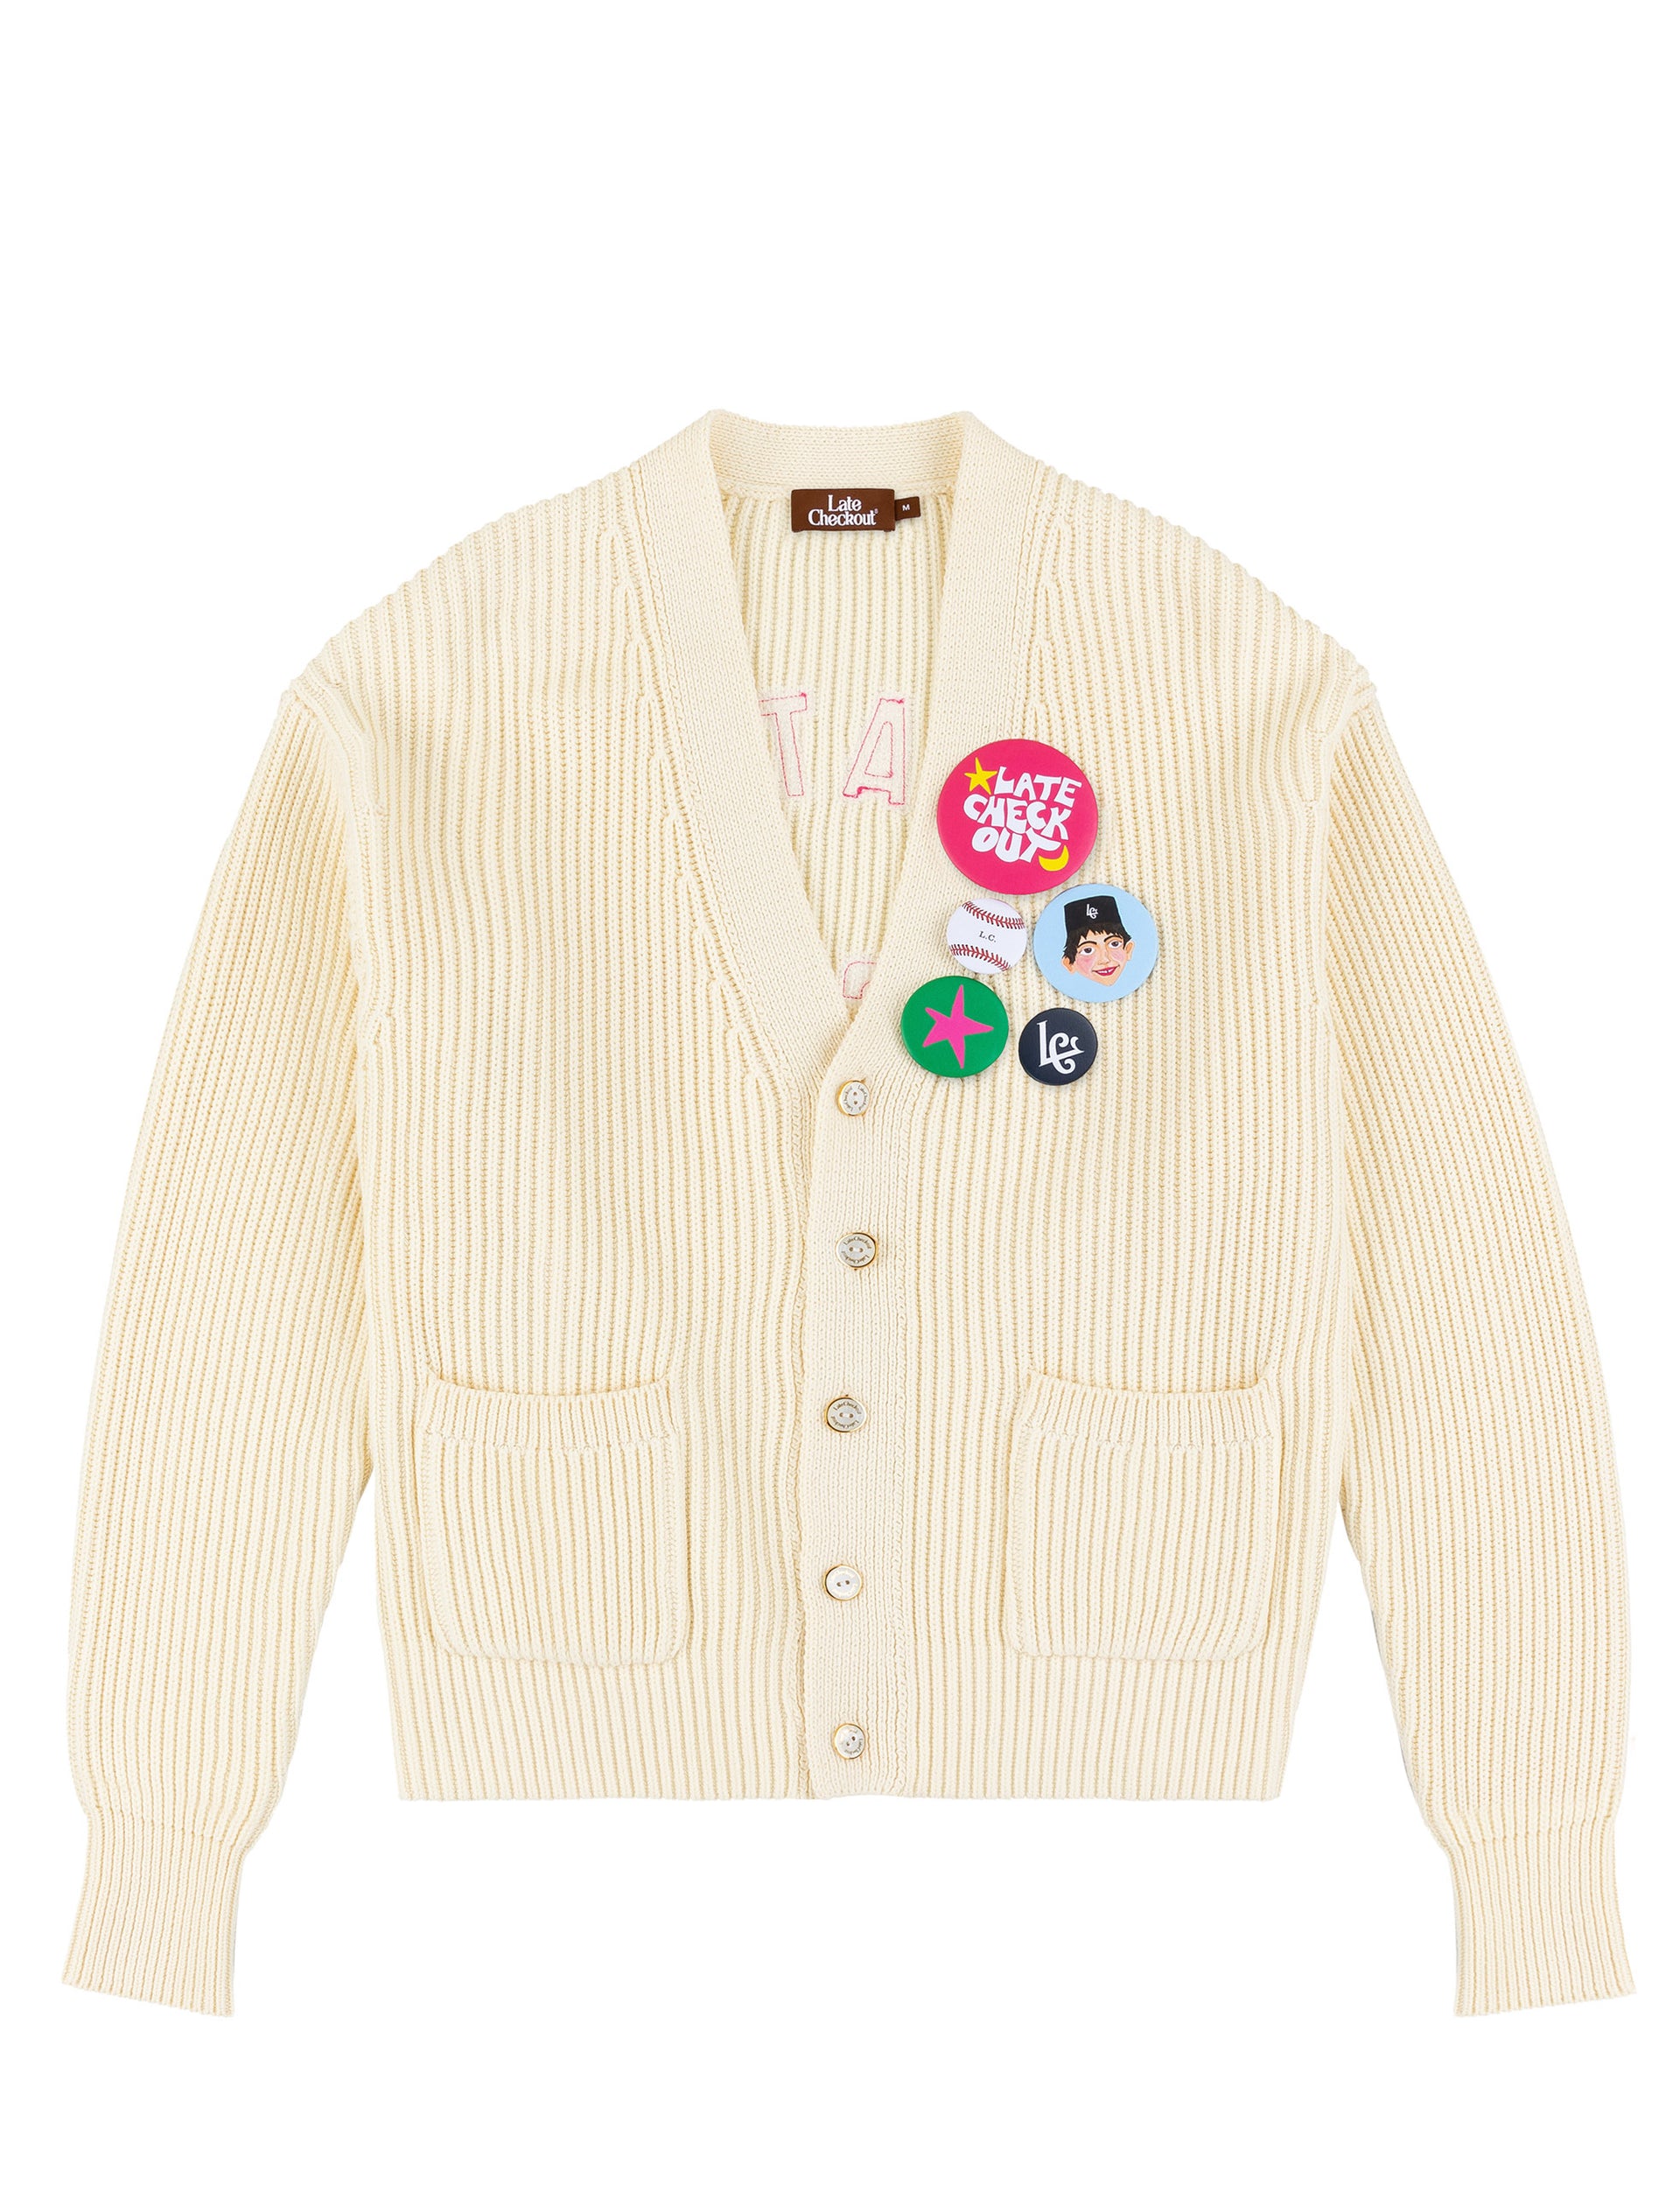 LATE CHECKOUT Cream Cardigan